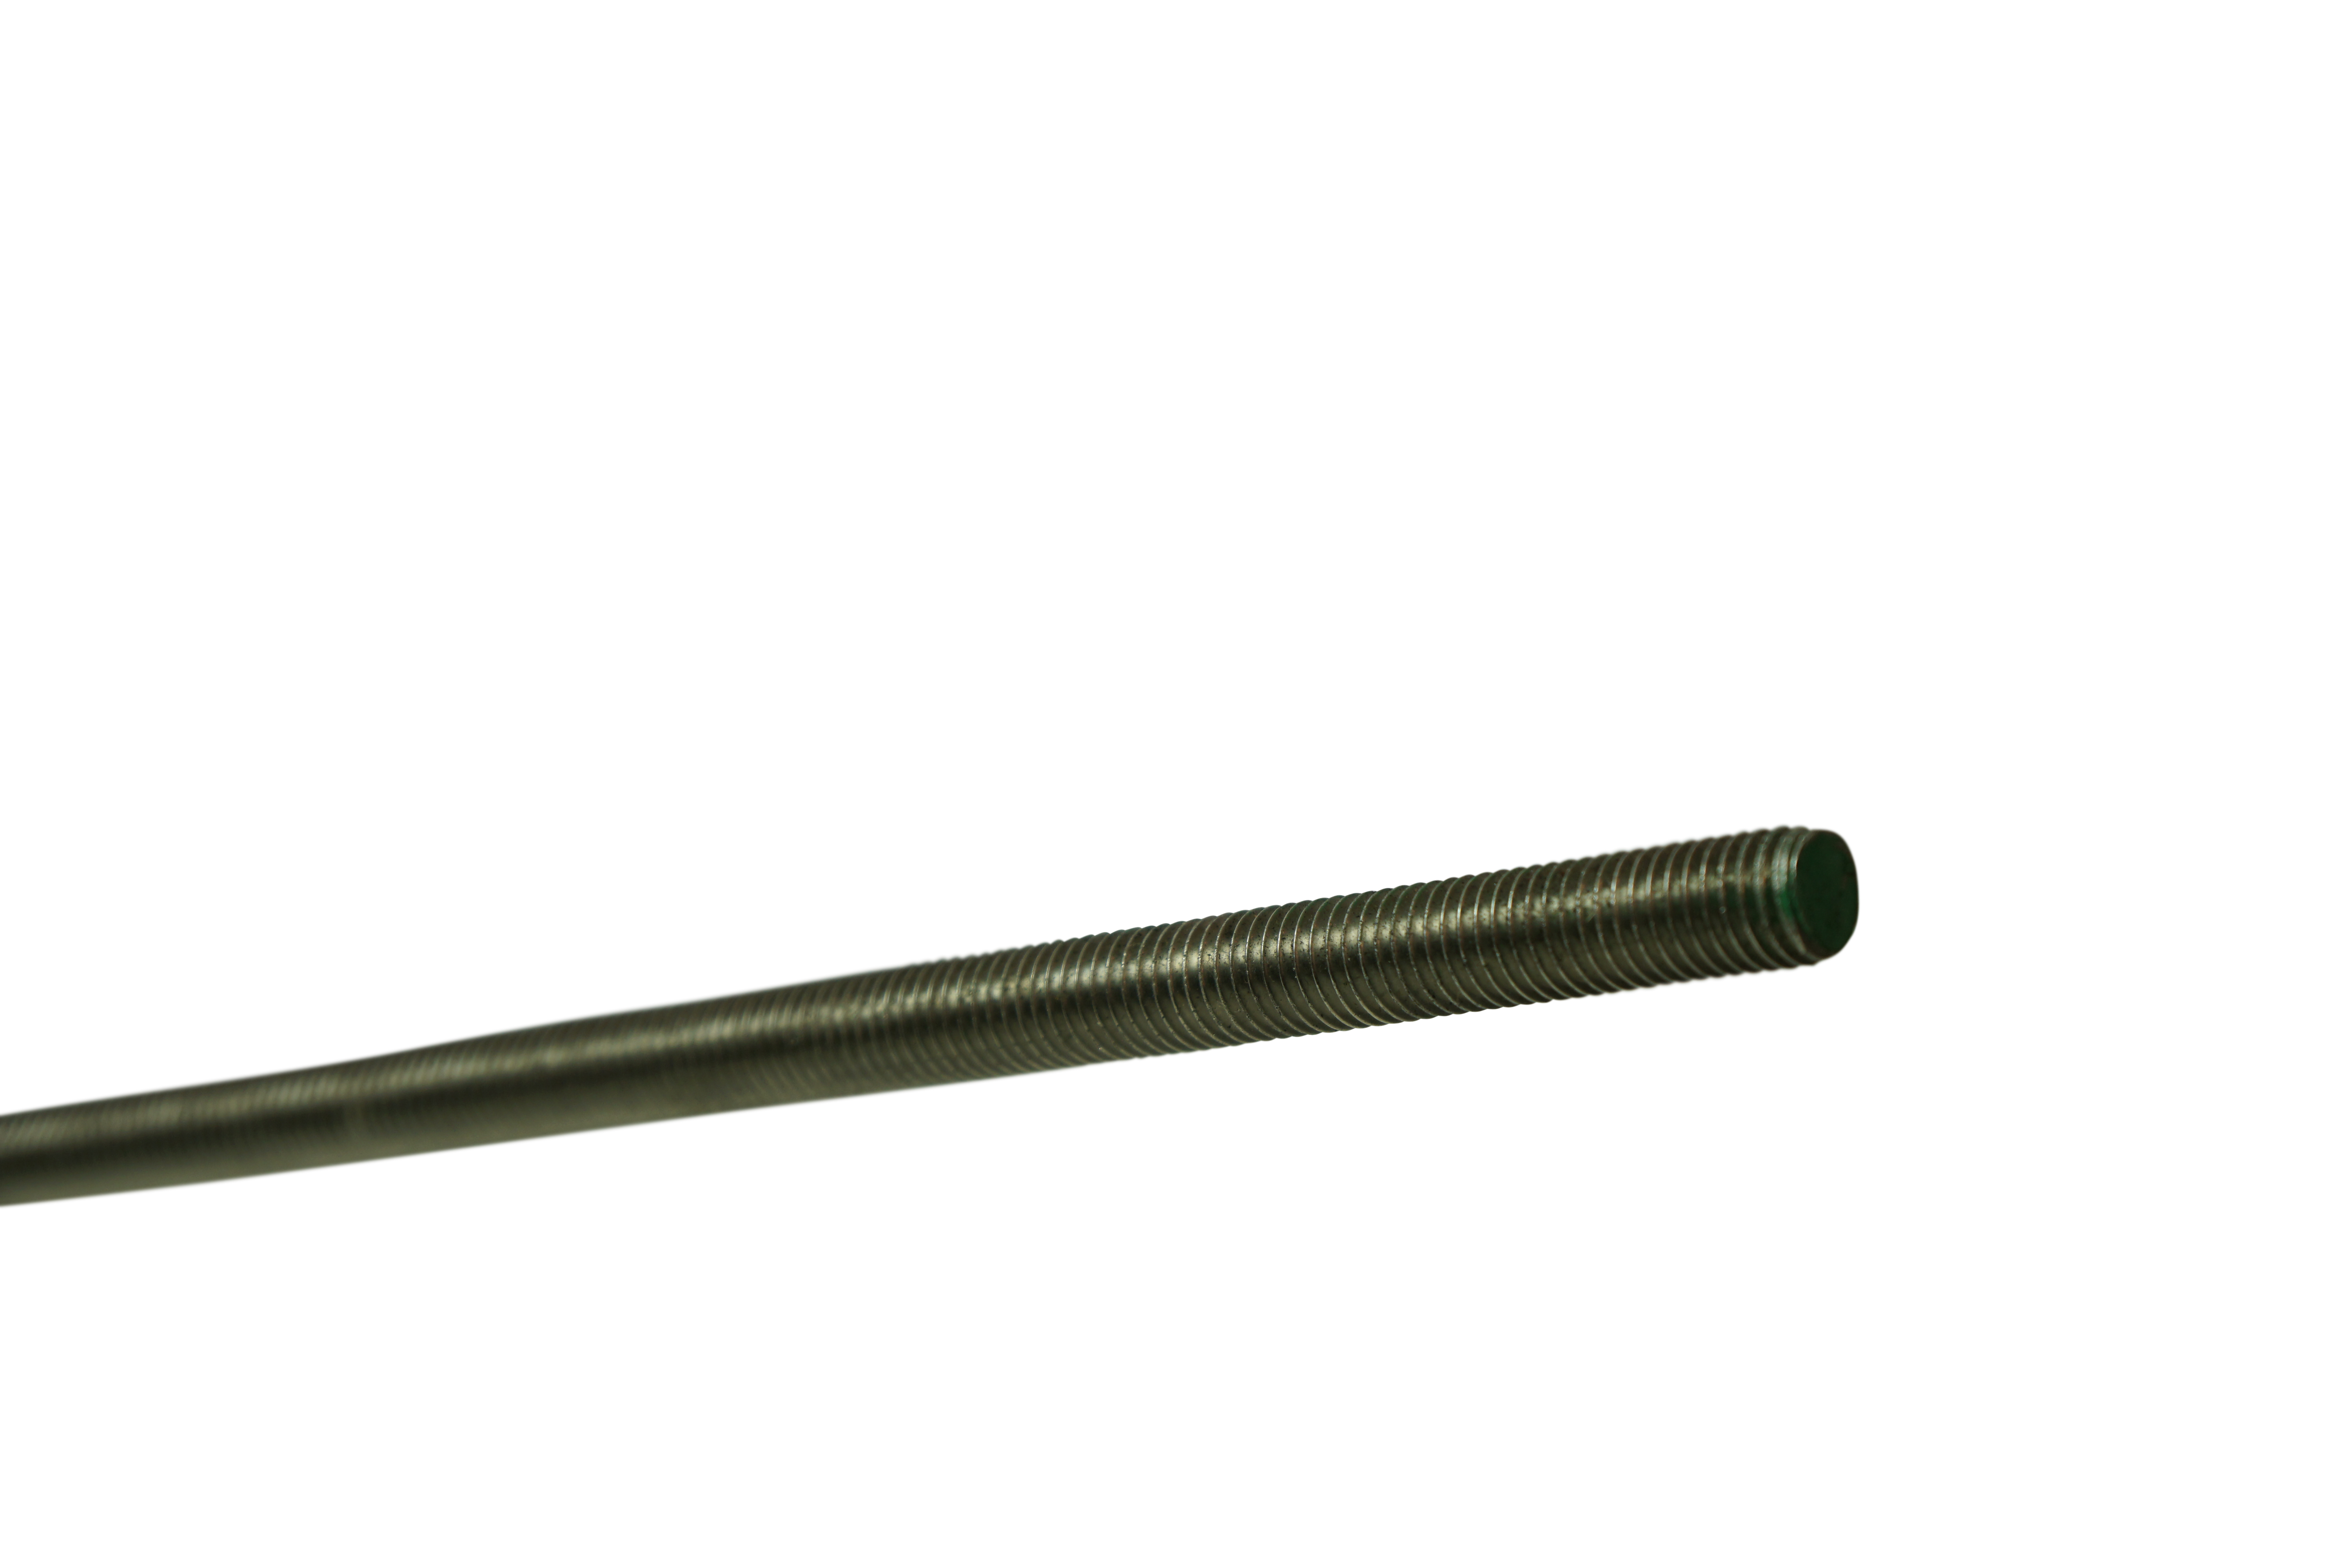 A2 Stainless Steel Studding (Threaded Rod)